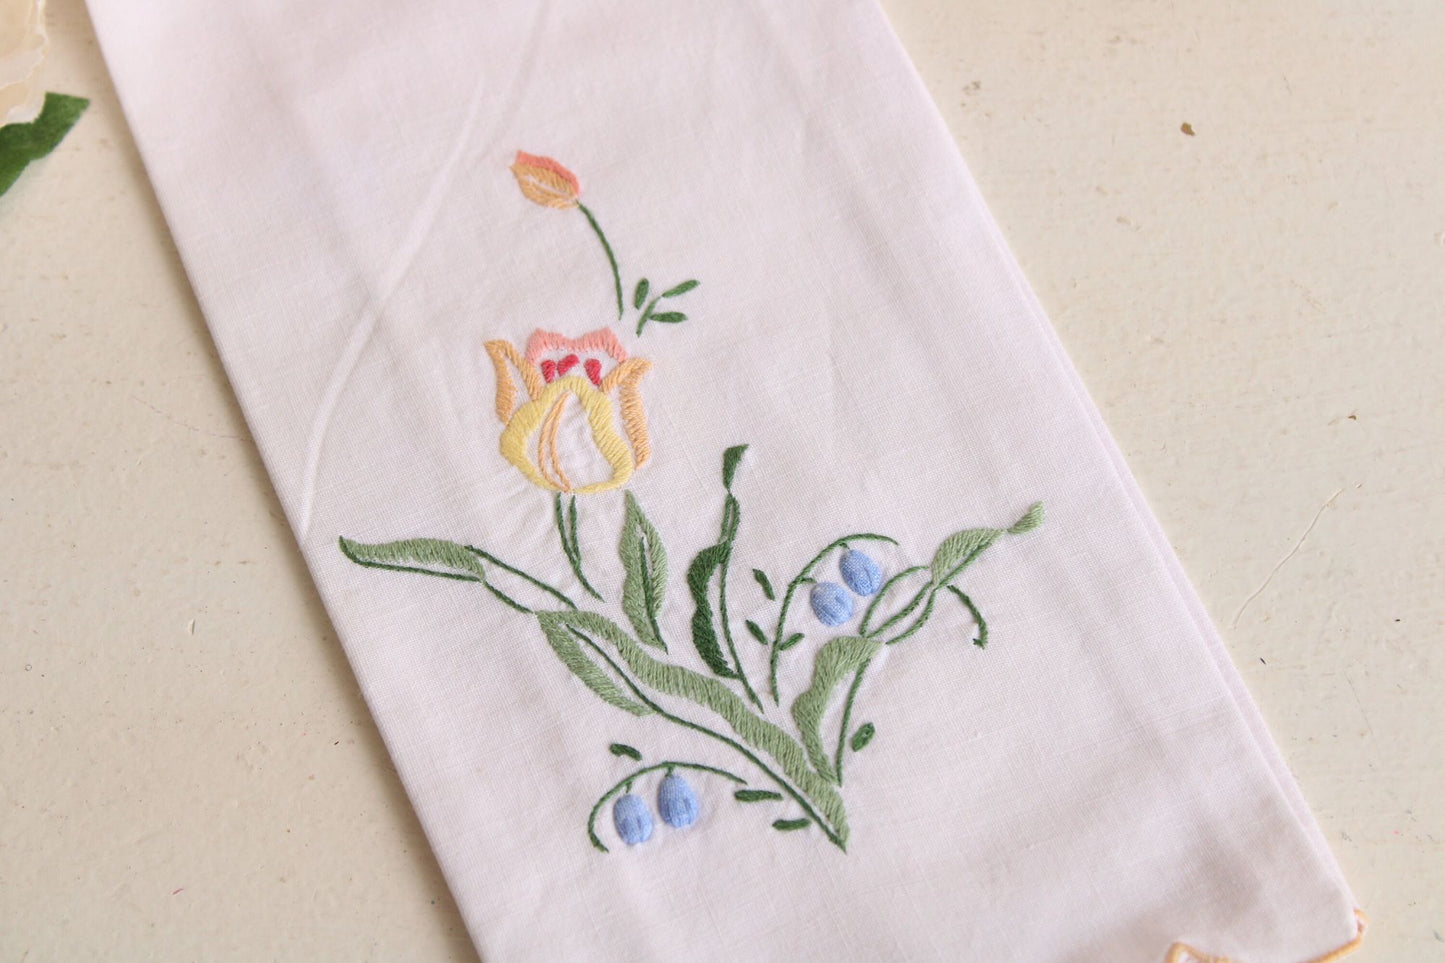 Vintage White Linen with Embroidered Flowers Hand Towel